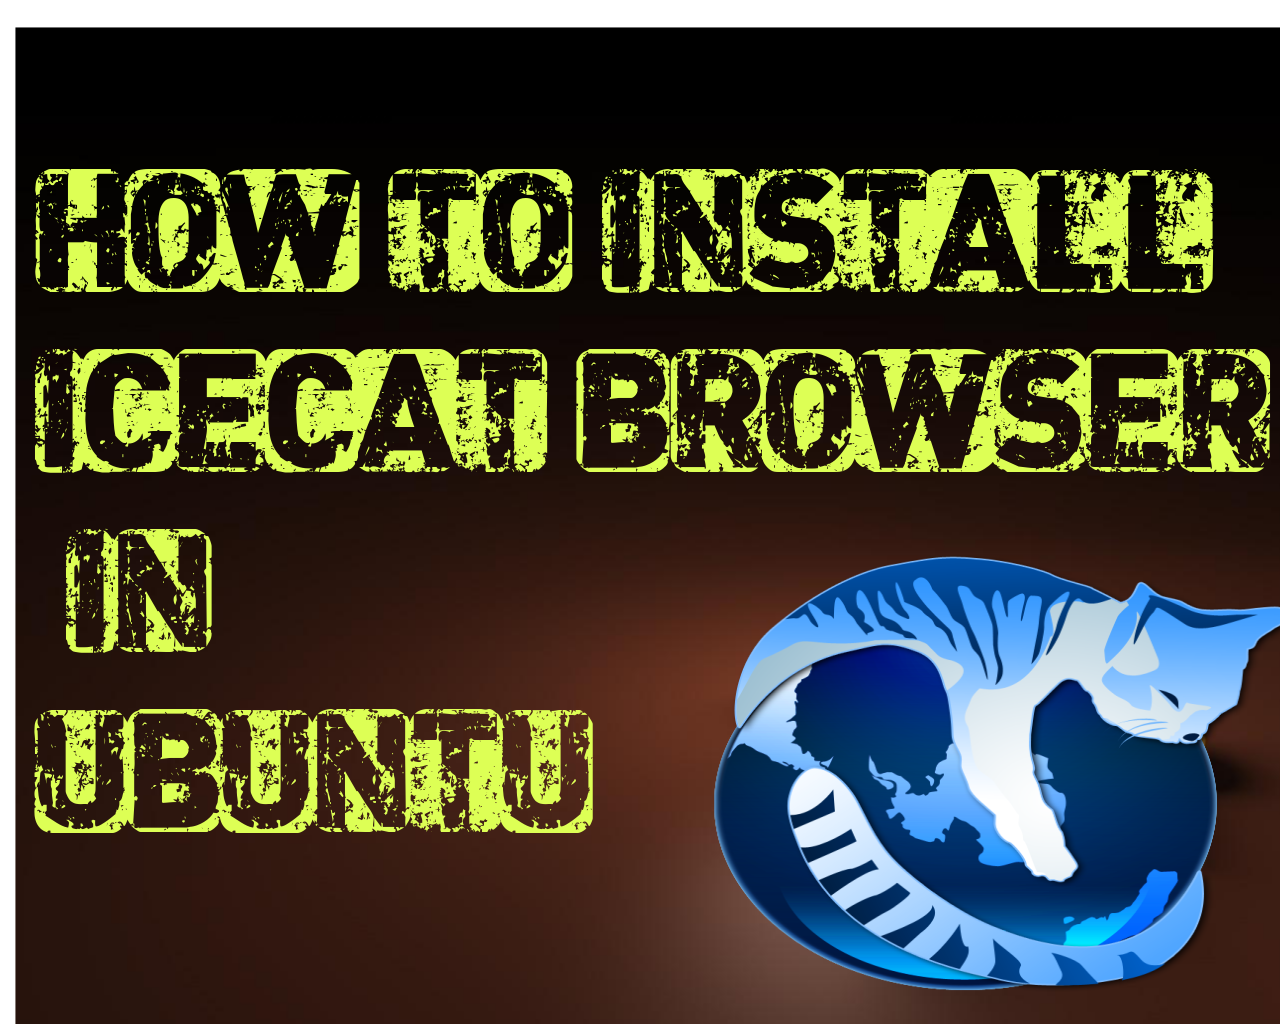 icecat browser for windows